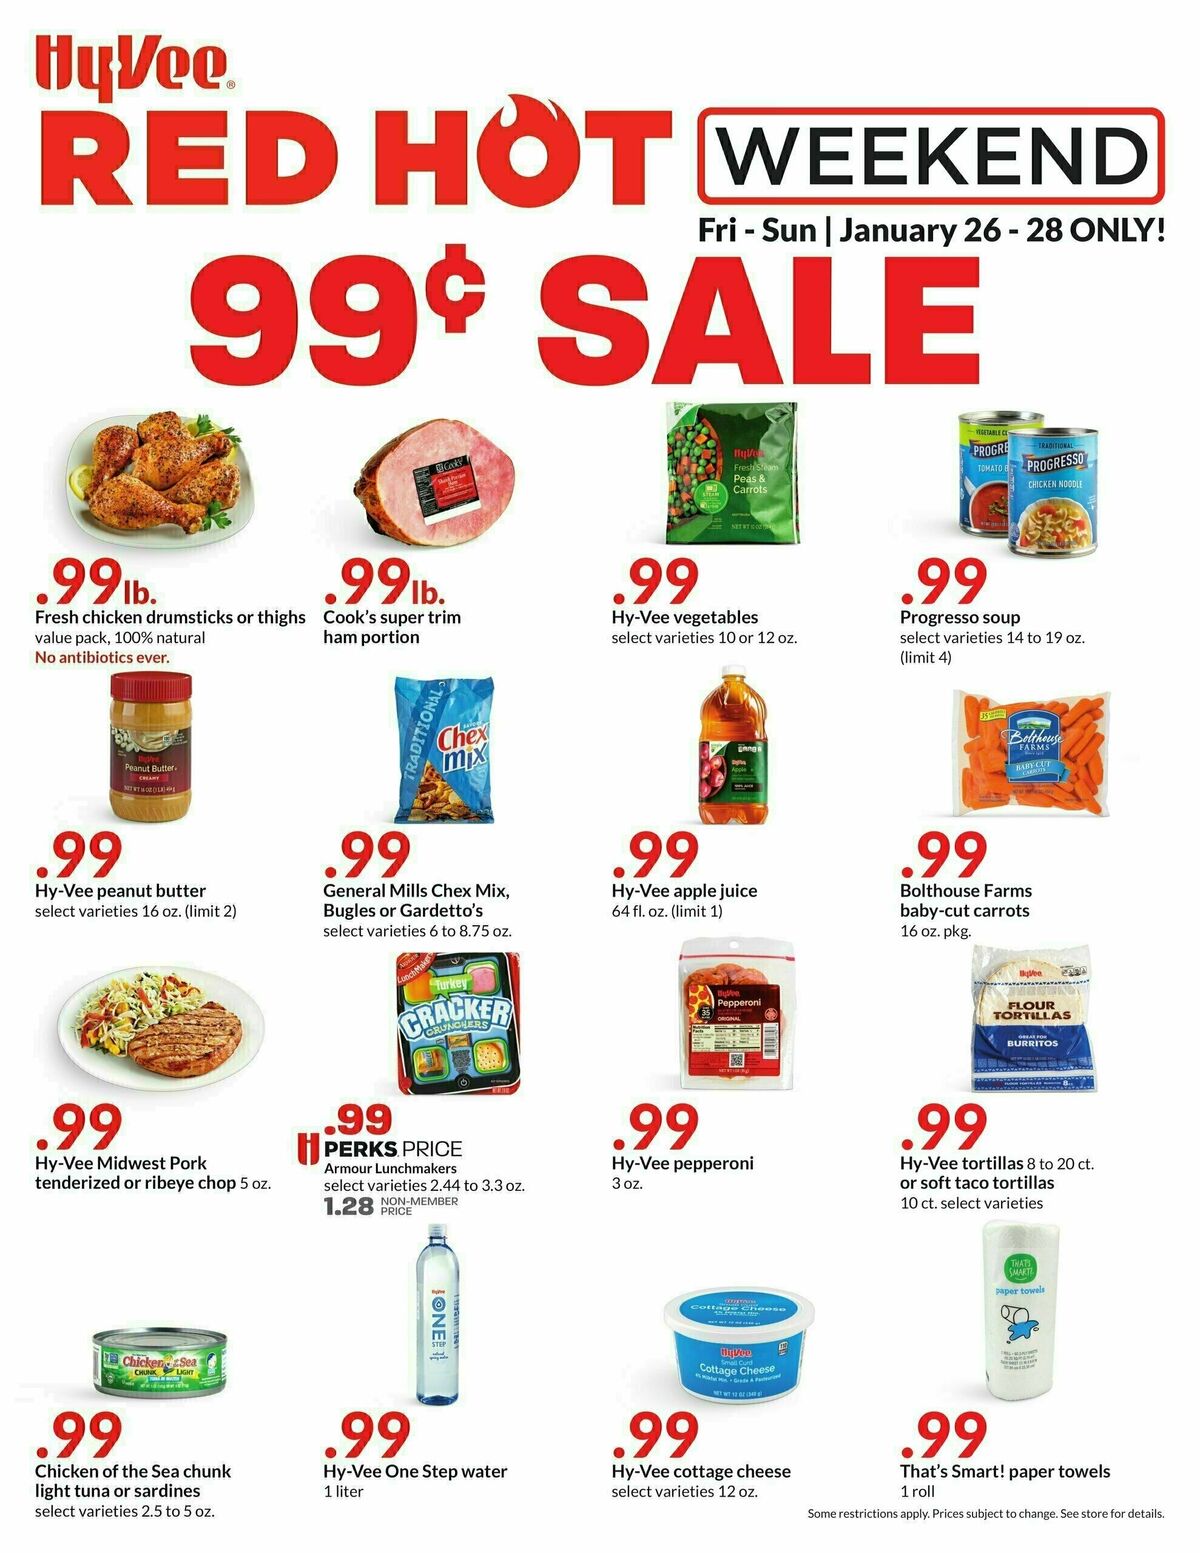 HyVee Red Hot Weekend Deals & Ads from January 26